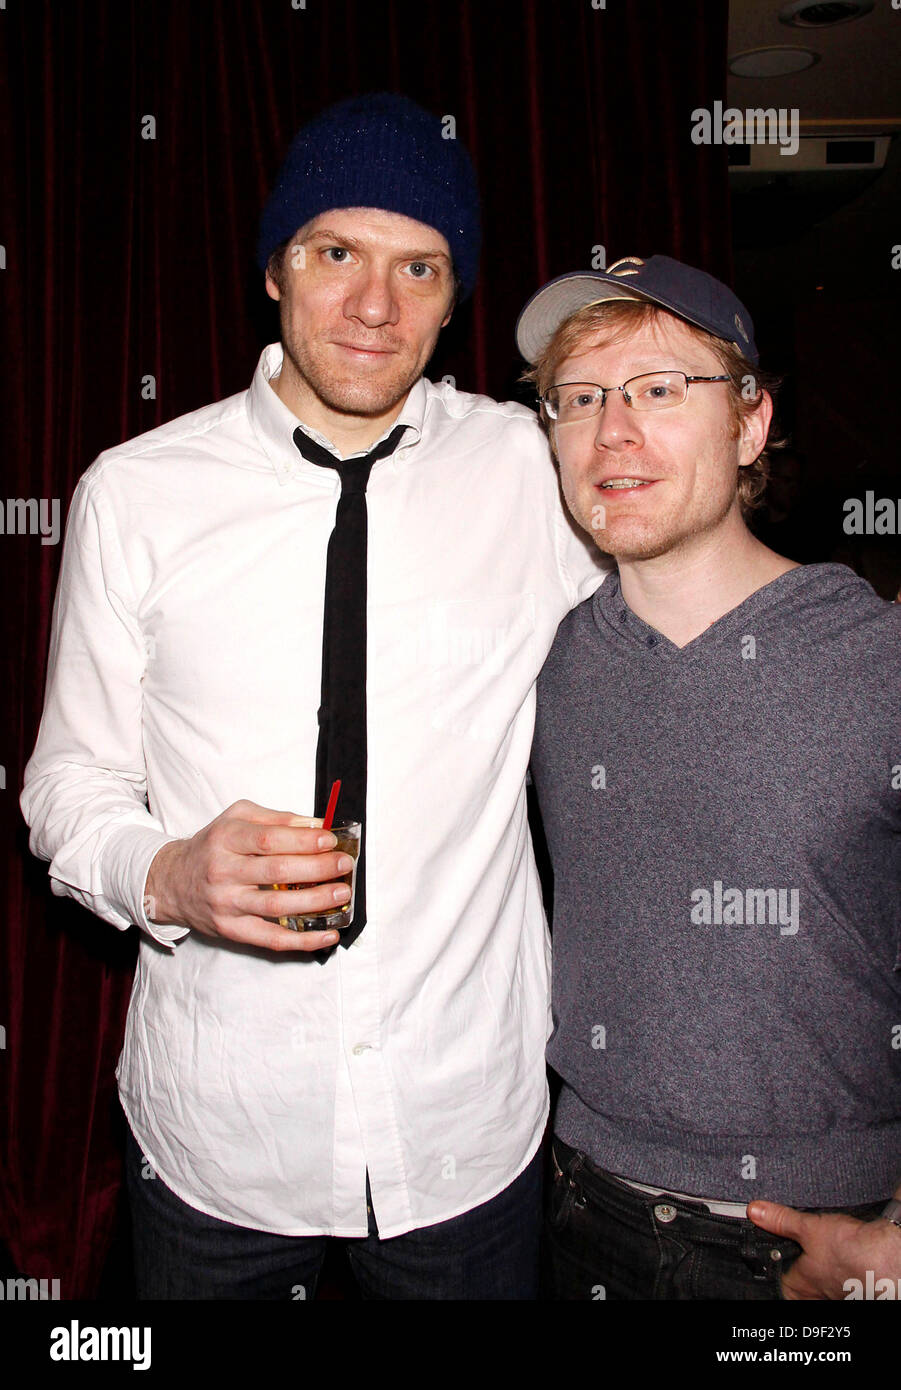 Adam Rapp and his brother Anthony Rapp Opening night after party for the Off-Broadway production of The 'Hallway Trilogy: Nursing' held at Dublin 6 restaurant New York City, USA - 24.02.11 Stock Photo